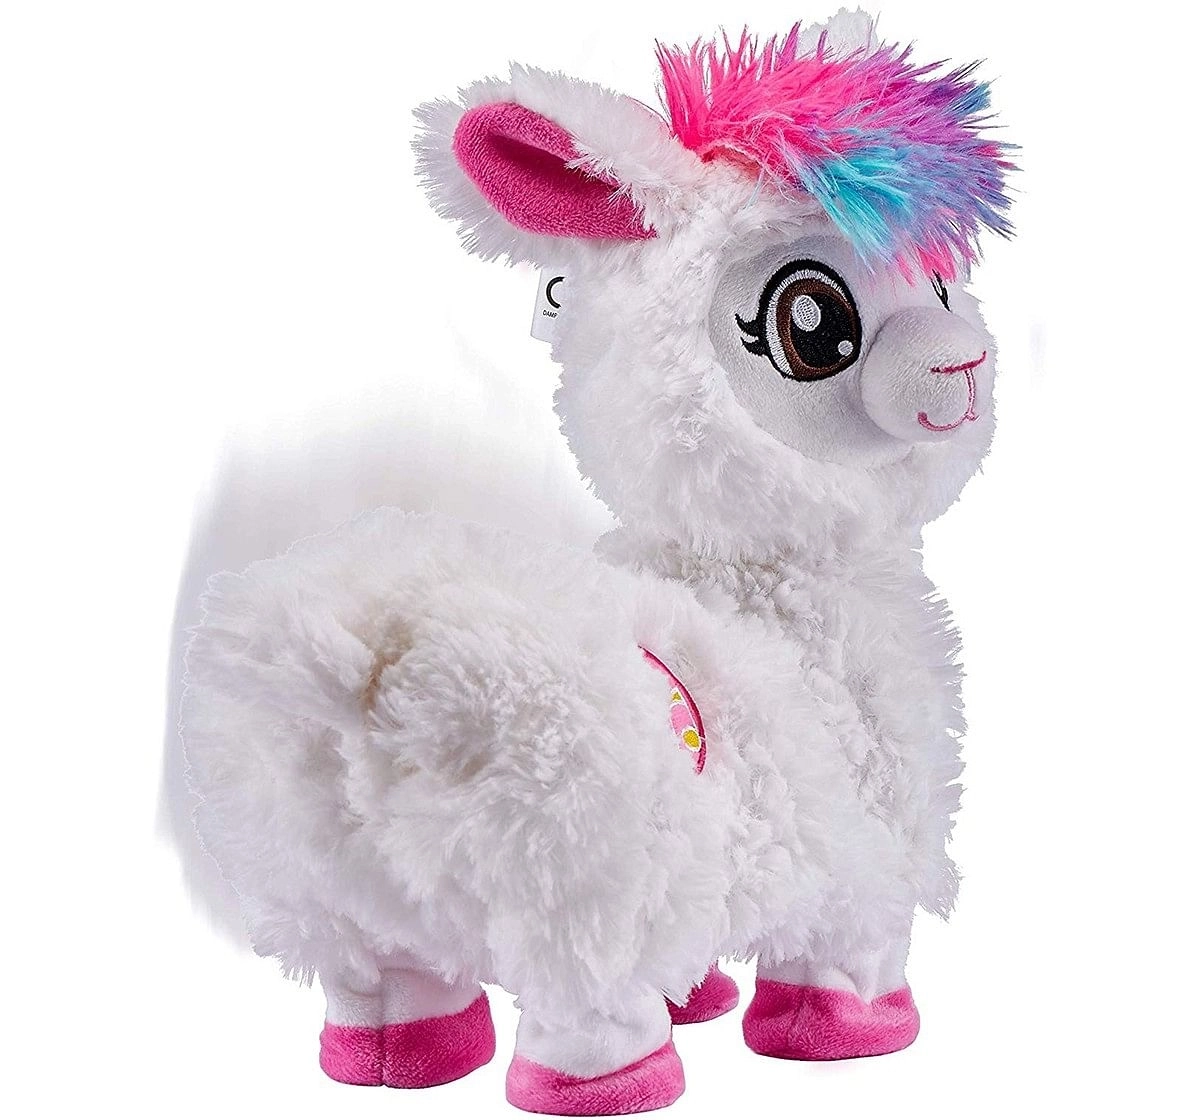 Pets Alive Boppi The Booty Shaking Lama Interactive Soft Toys for Kids age 2Y+ - 14 Cm (White)